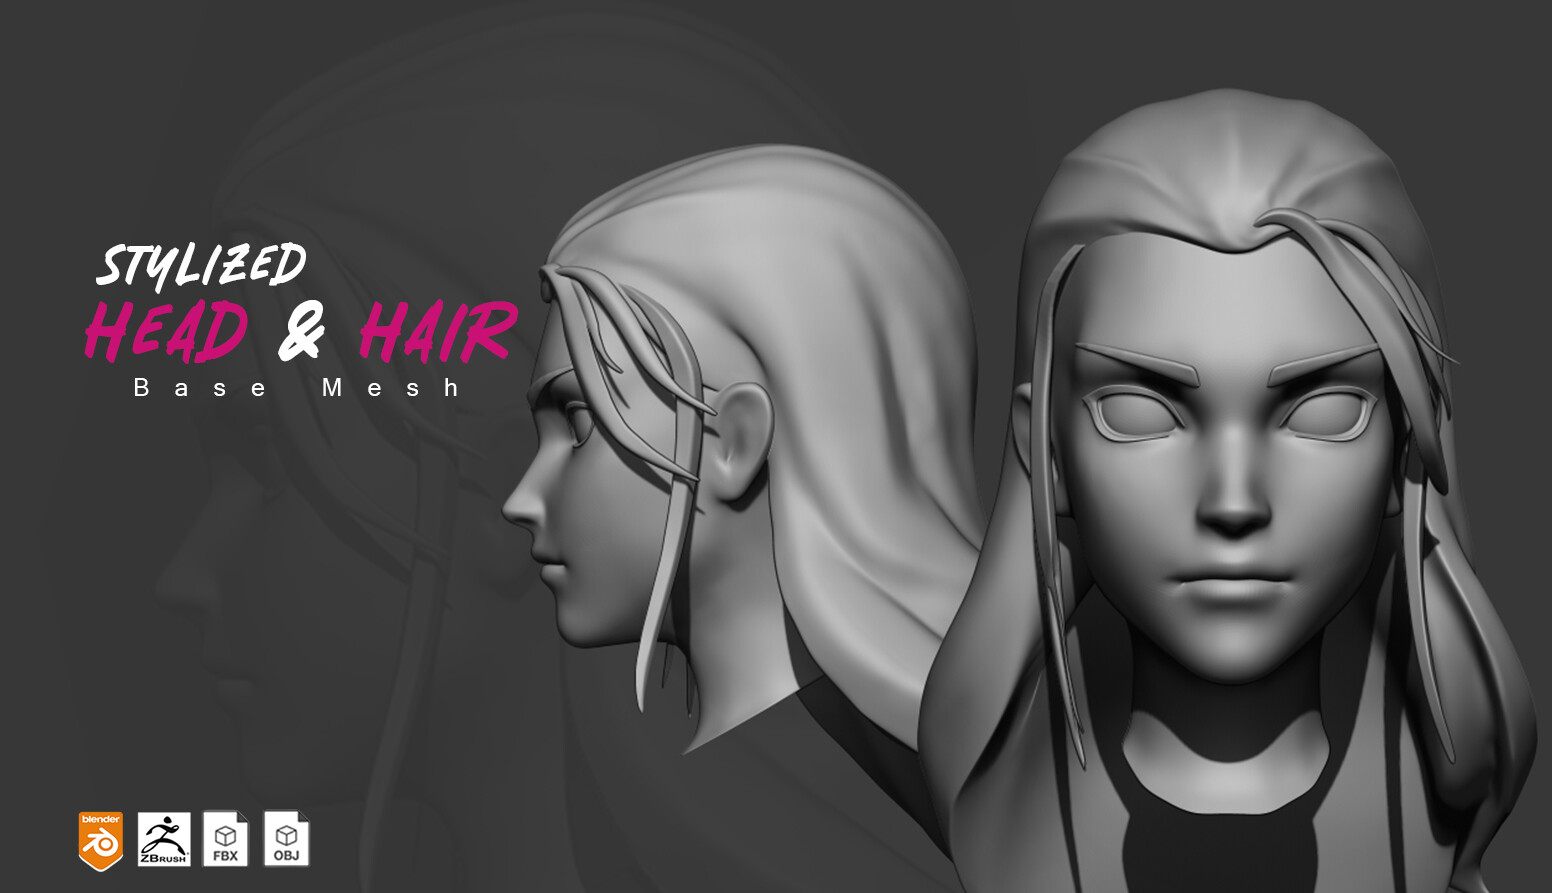 Sculpting a Stylized Girl in ZBrush